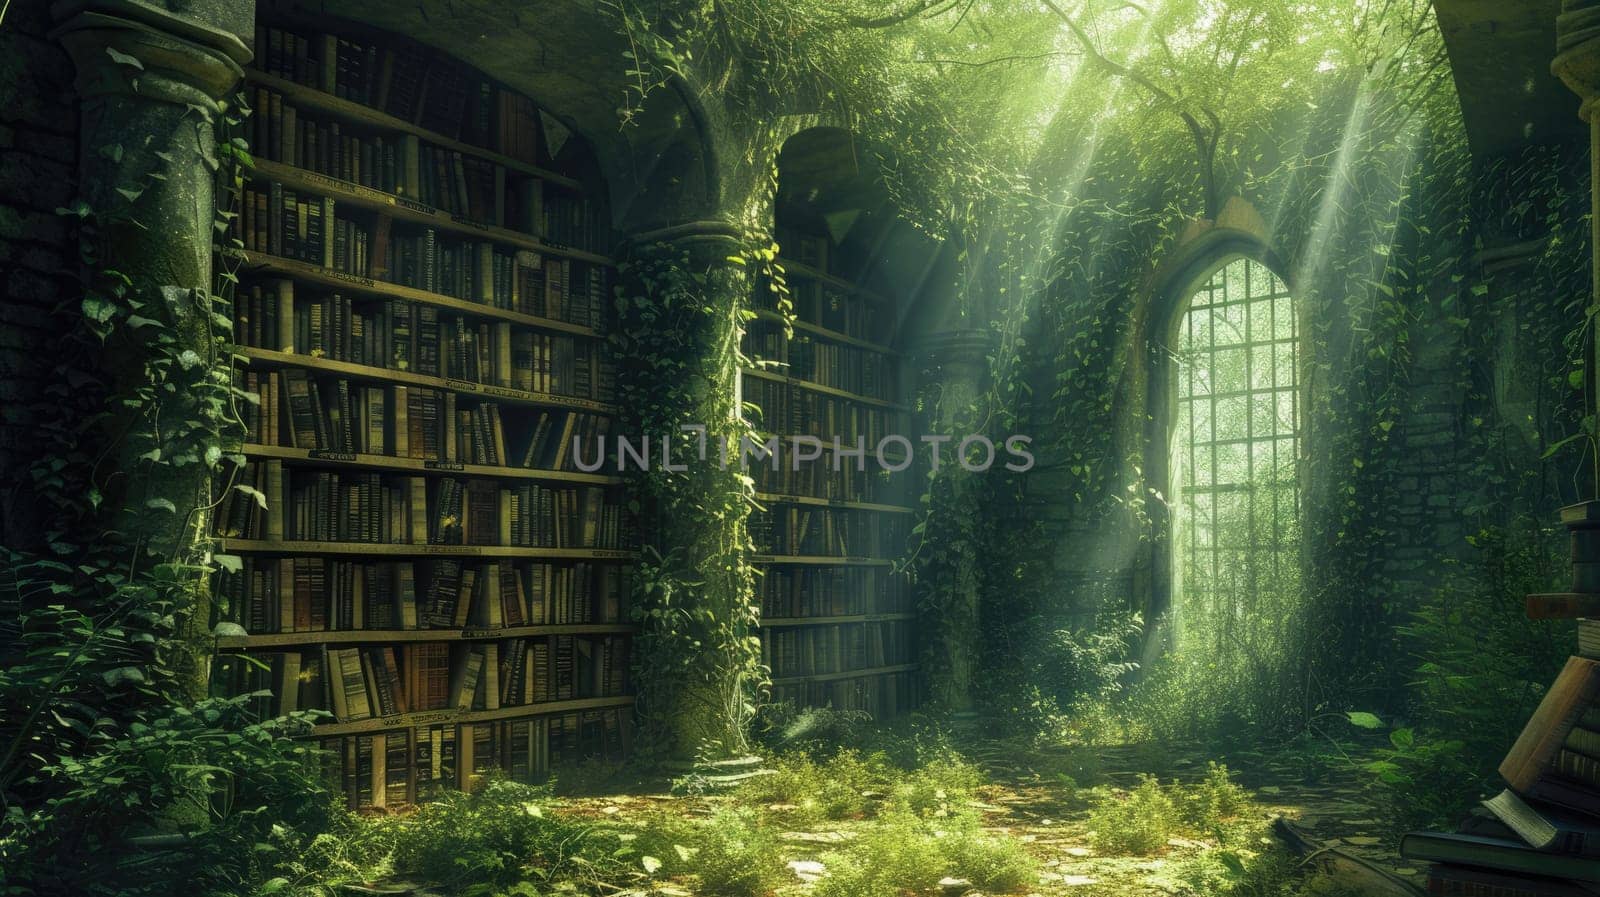 An ancient library in a hidden forest, overgrown with ivy, books filled with forgotten lore, mystical ambiance, sunlight filtering through leaves. Resplendent.